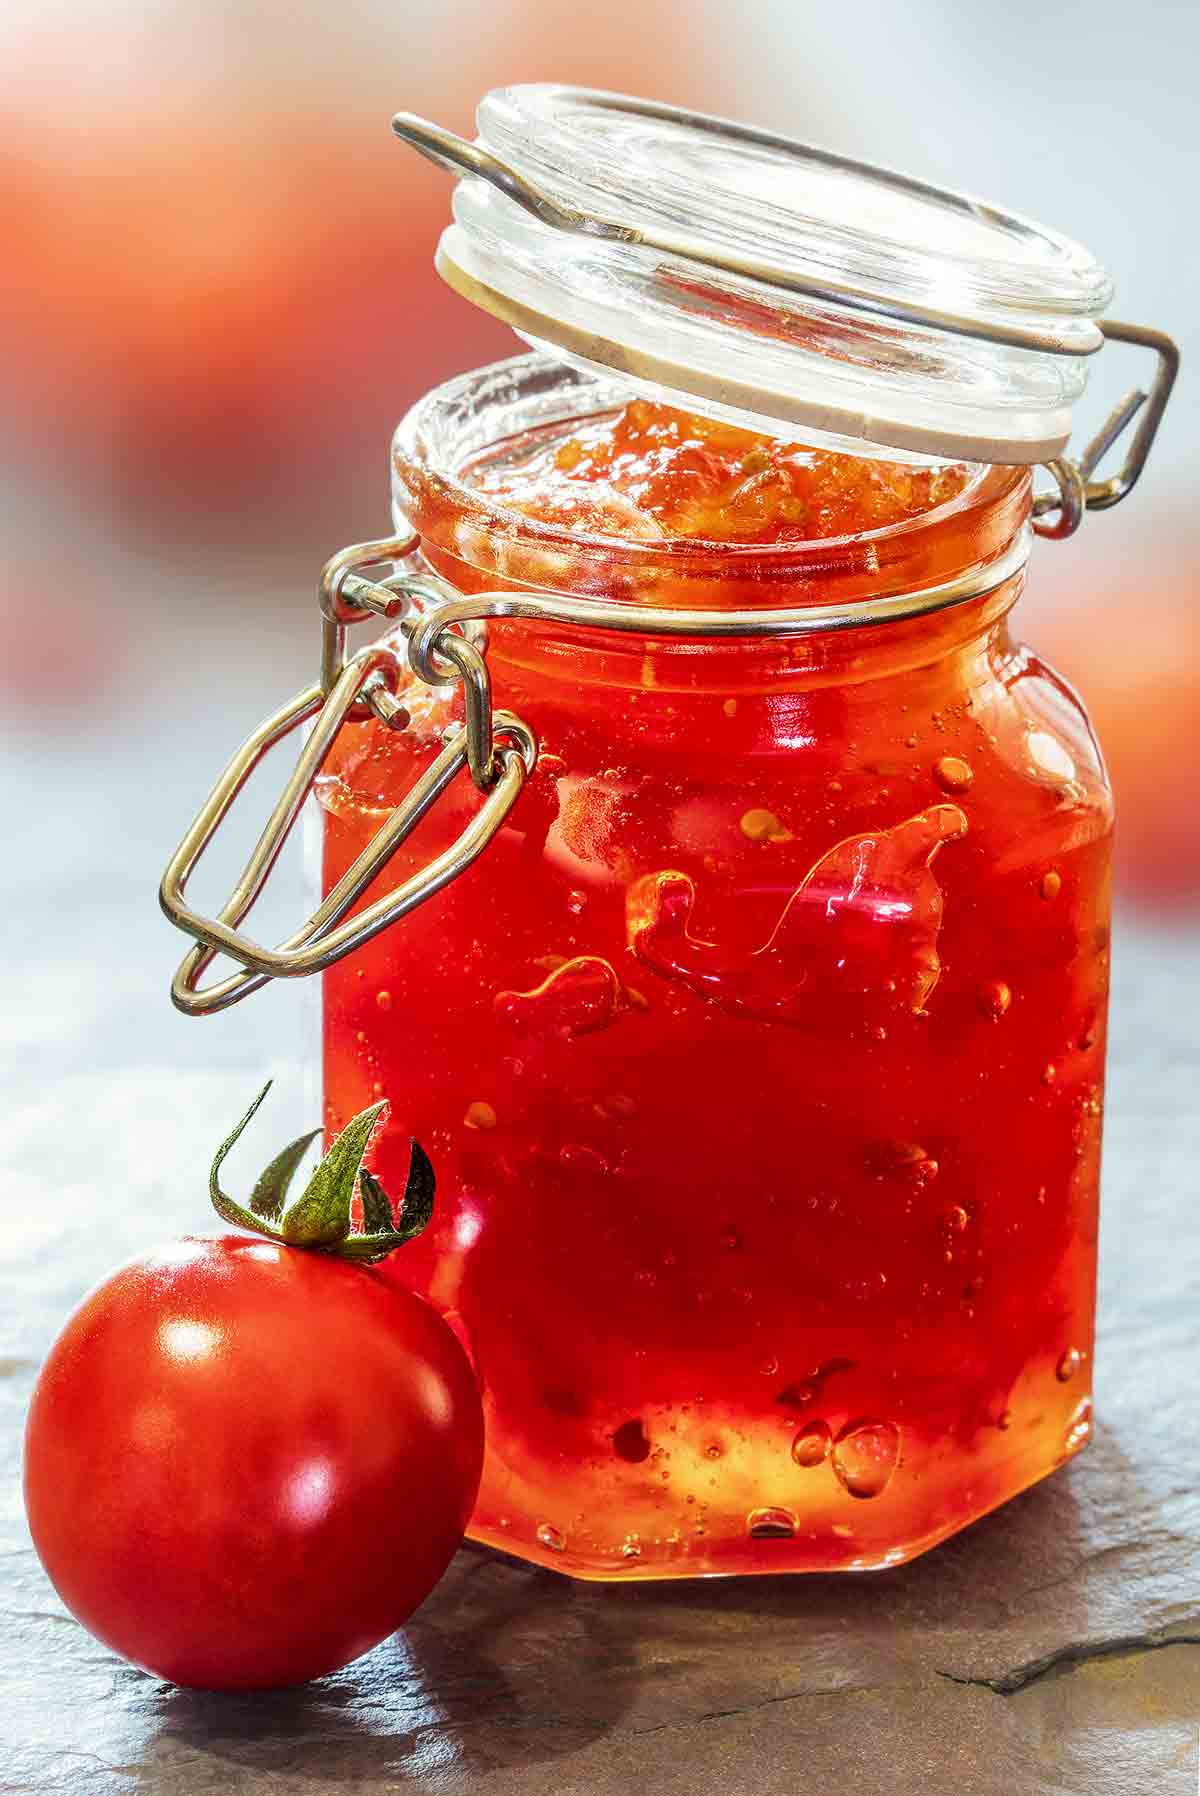 A jar of Portuguese tomato jelly with a small tomato next to it.